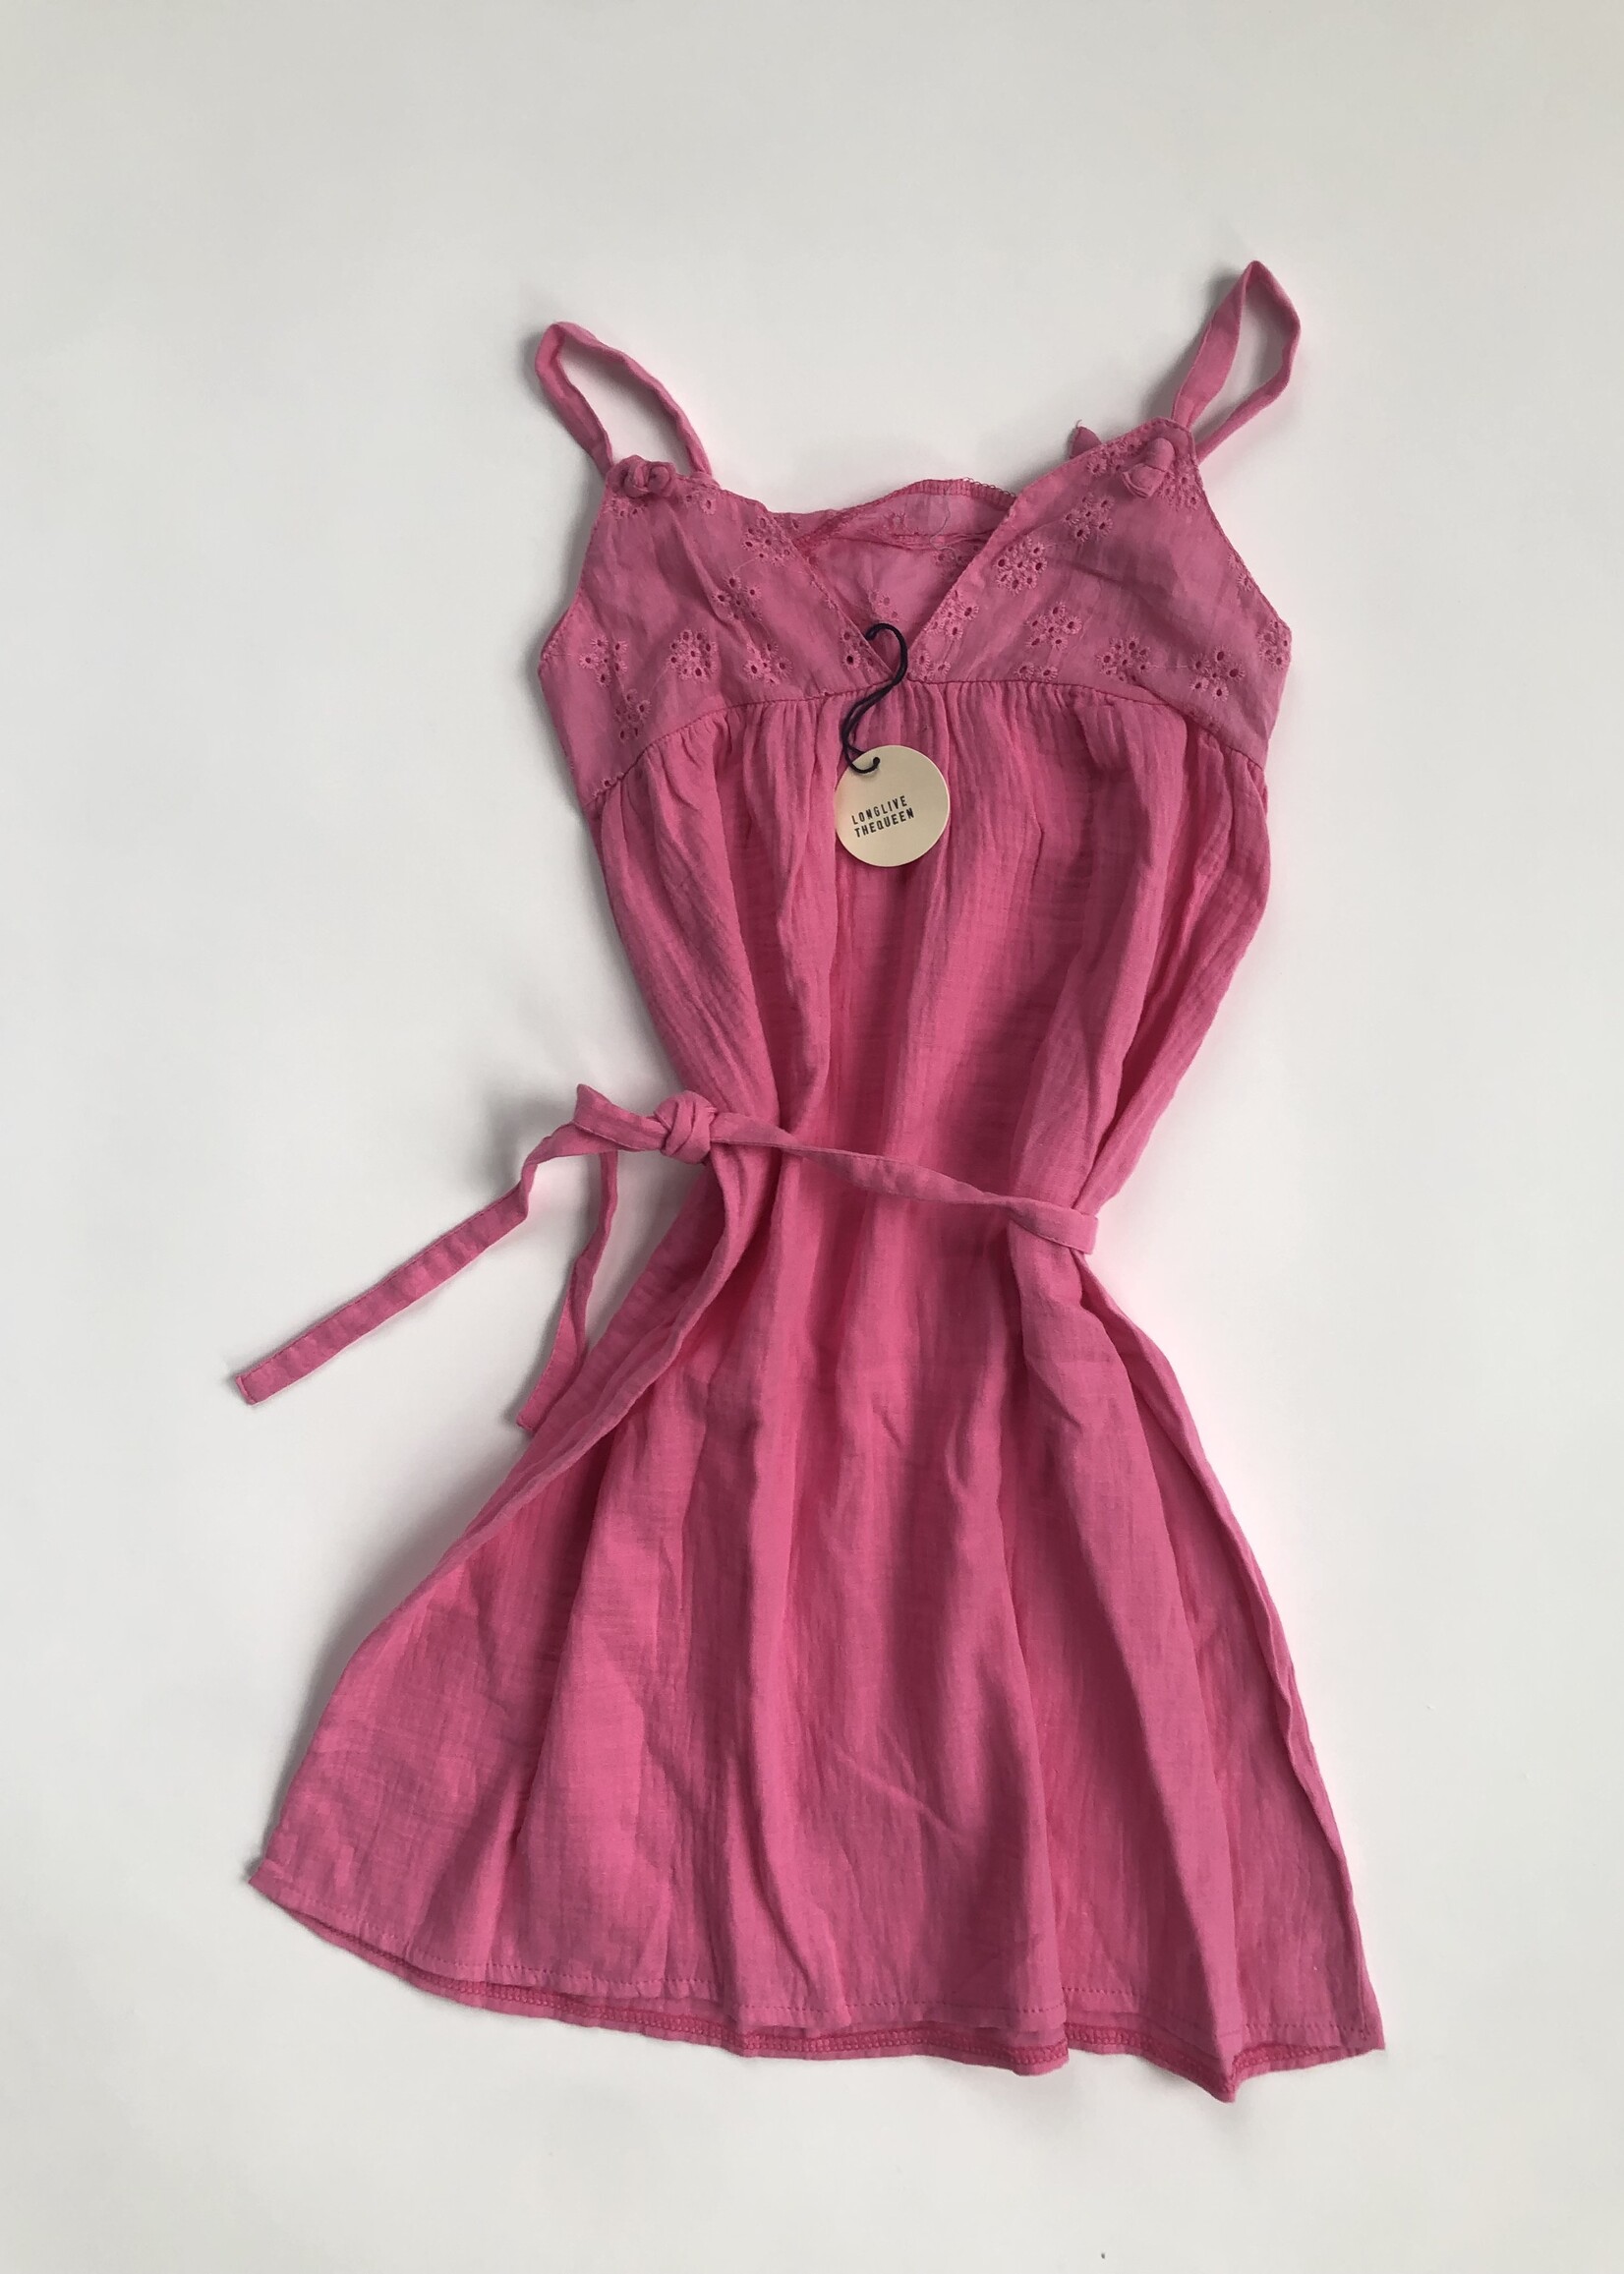 Long Live The Queen Pink Broderie Anglaise dress 8y